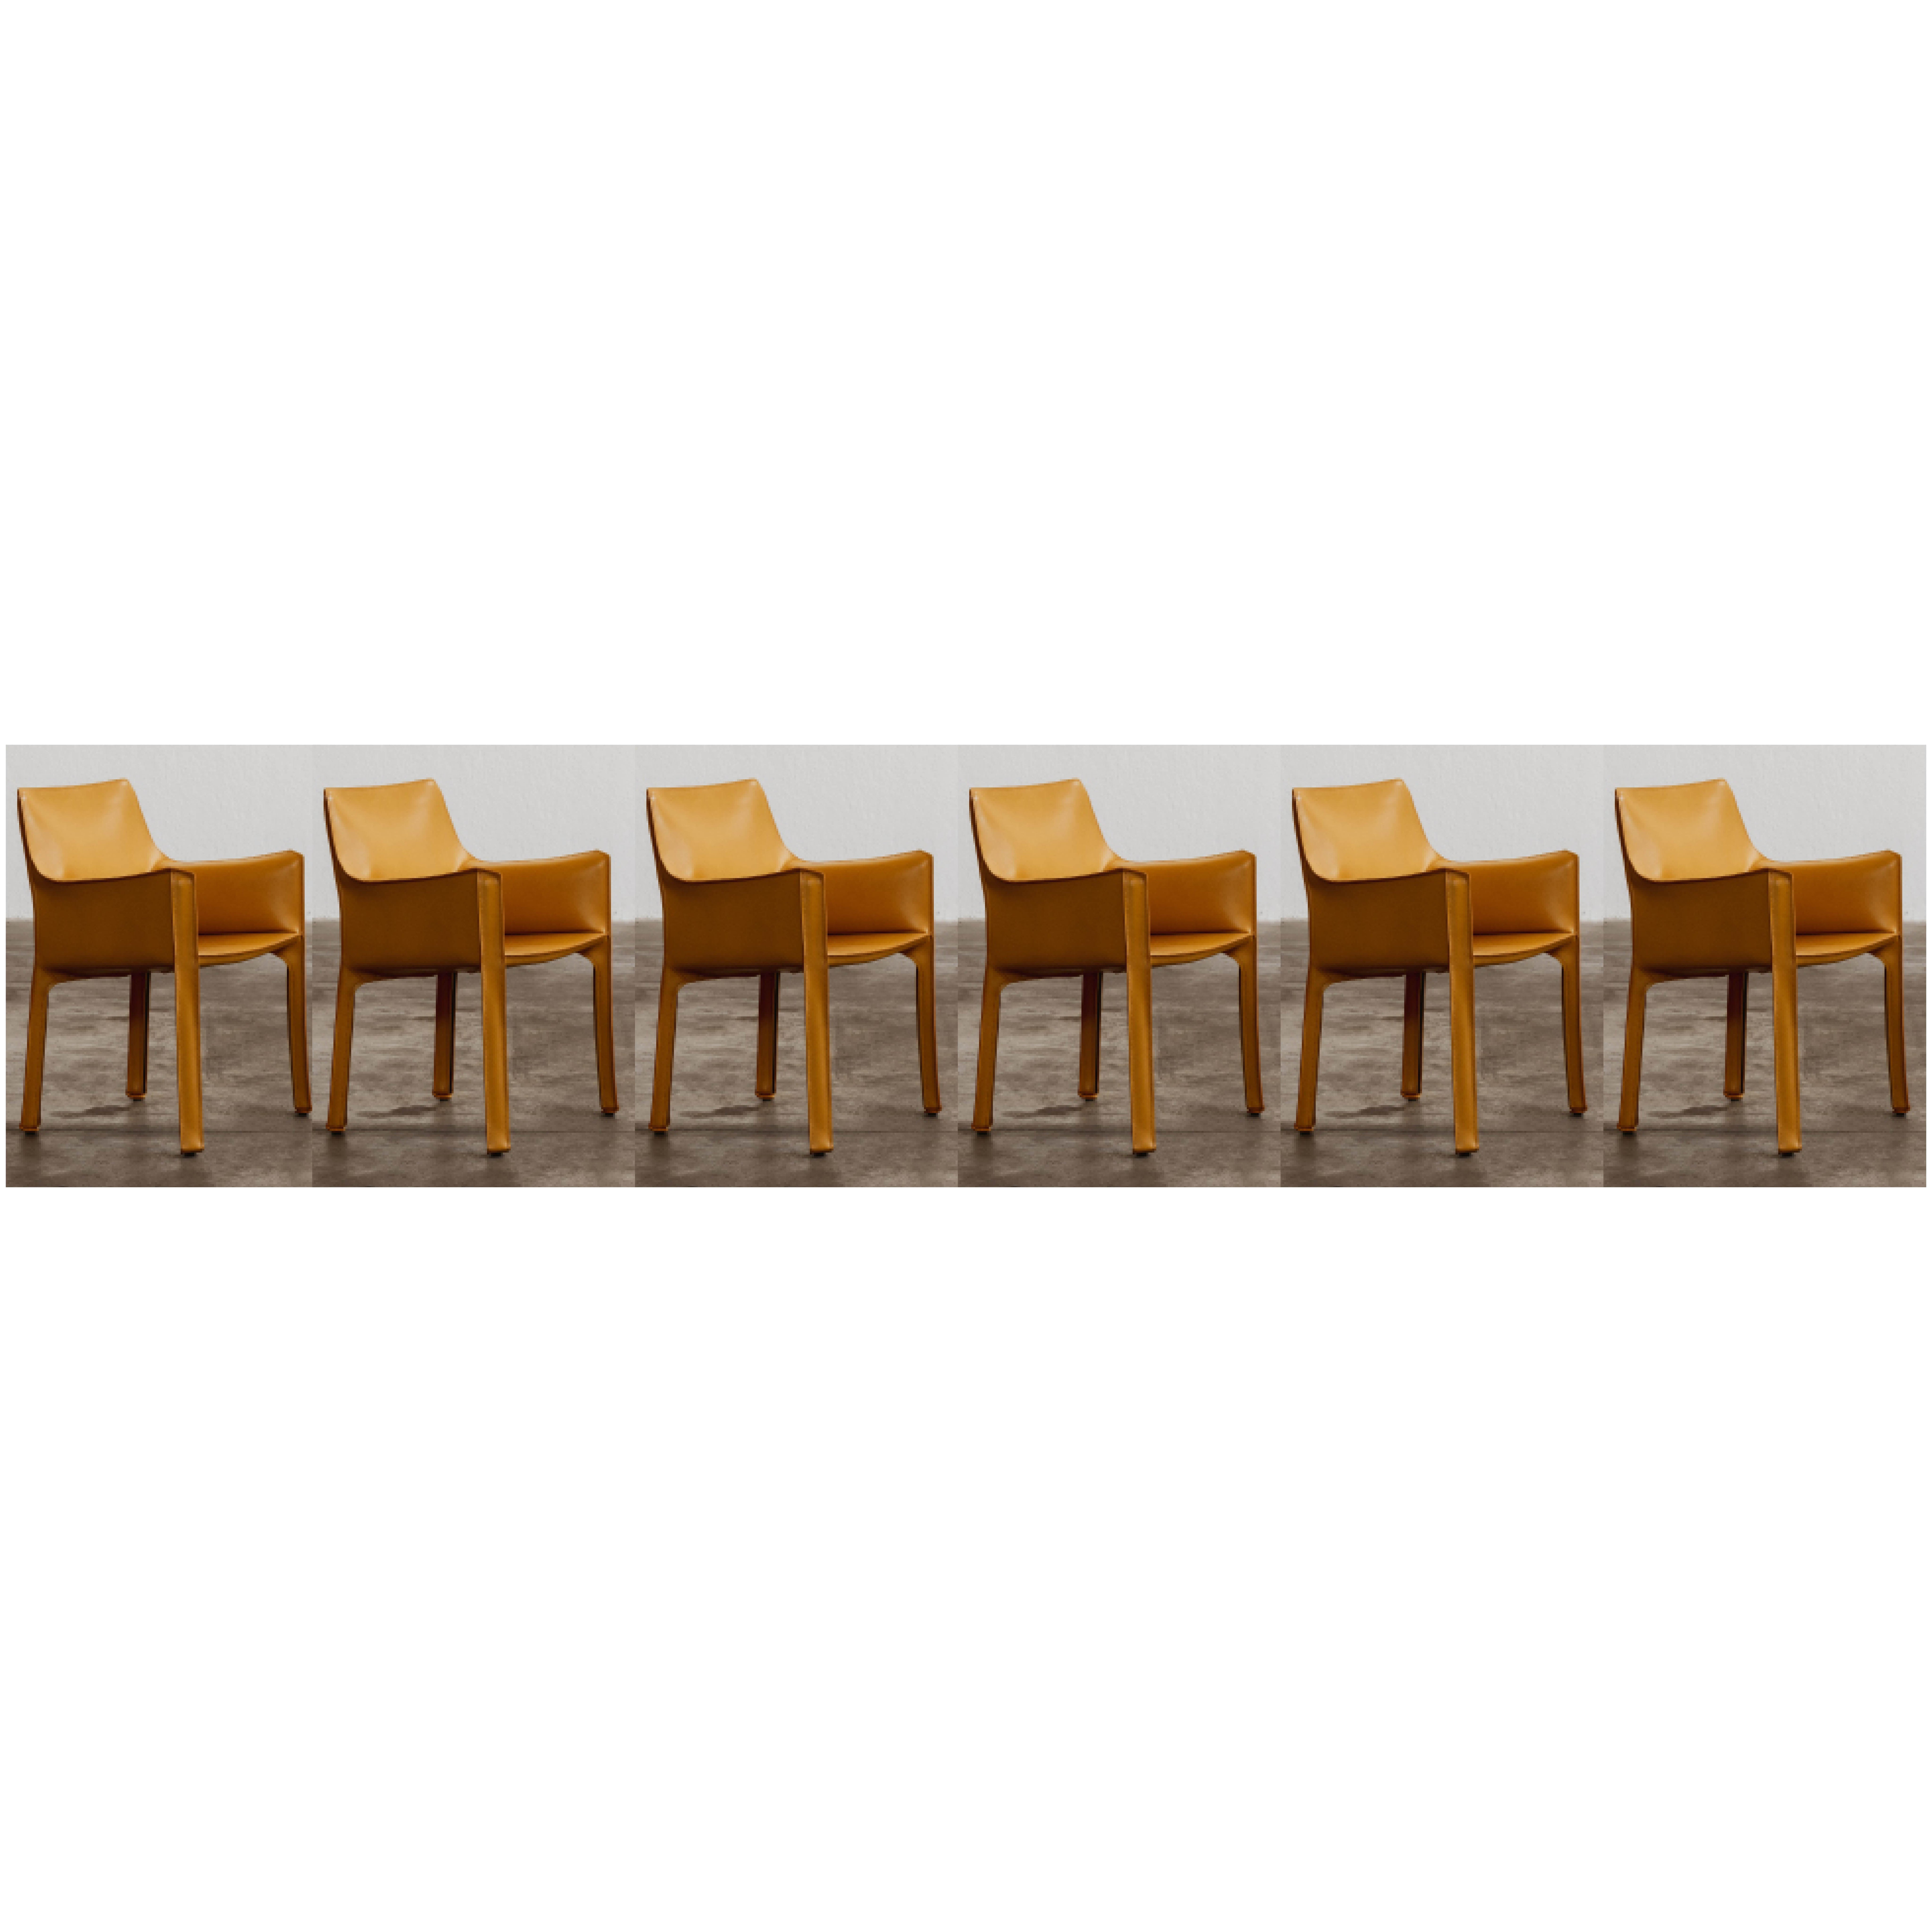 Mario Bellini "CAB 413" Chairs for Cassina in Yellow, 1977, Set of 6